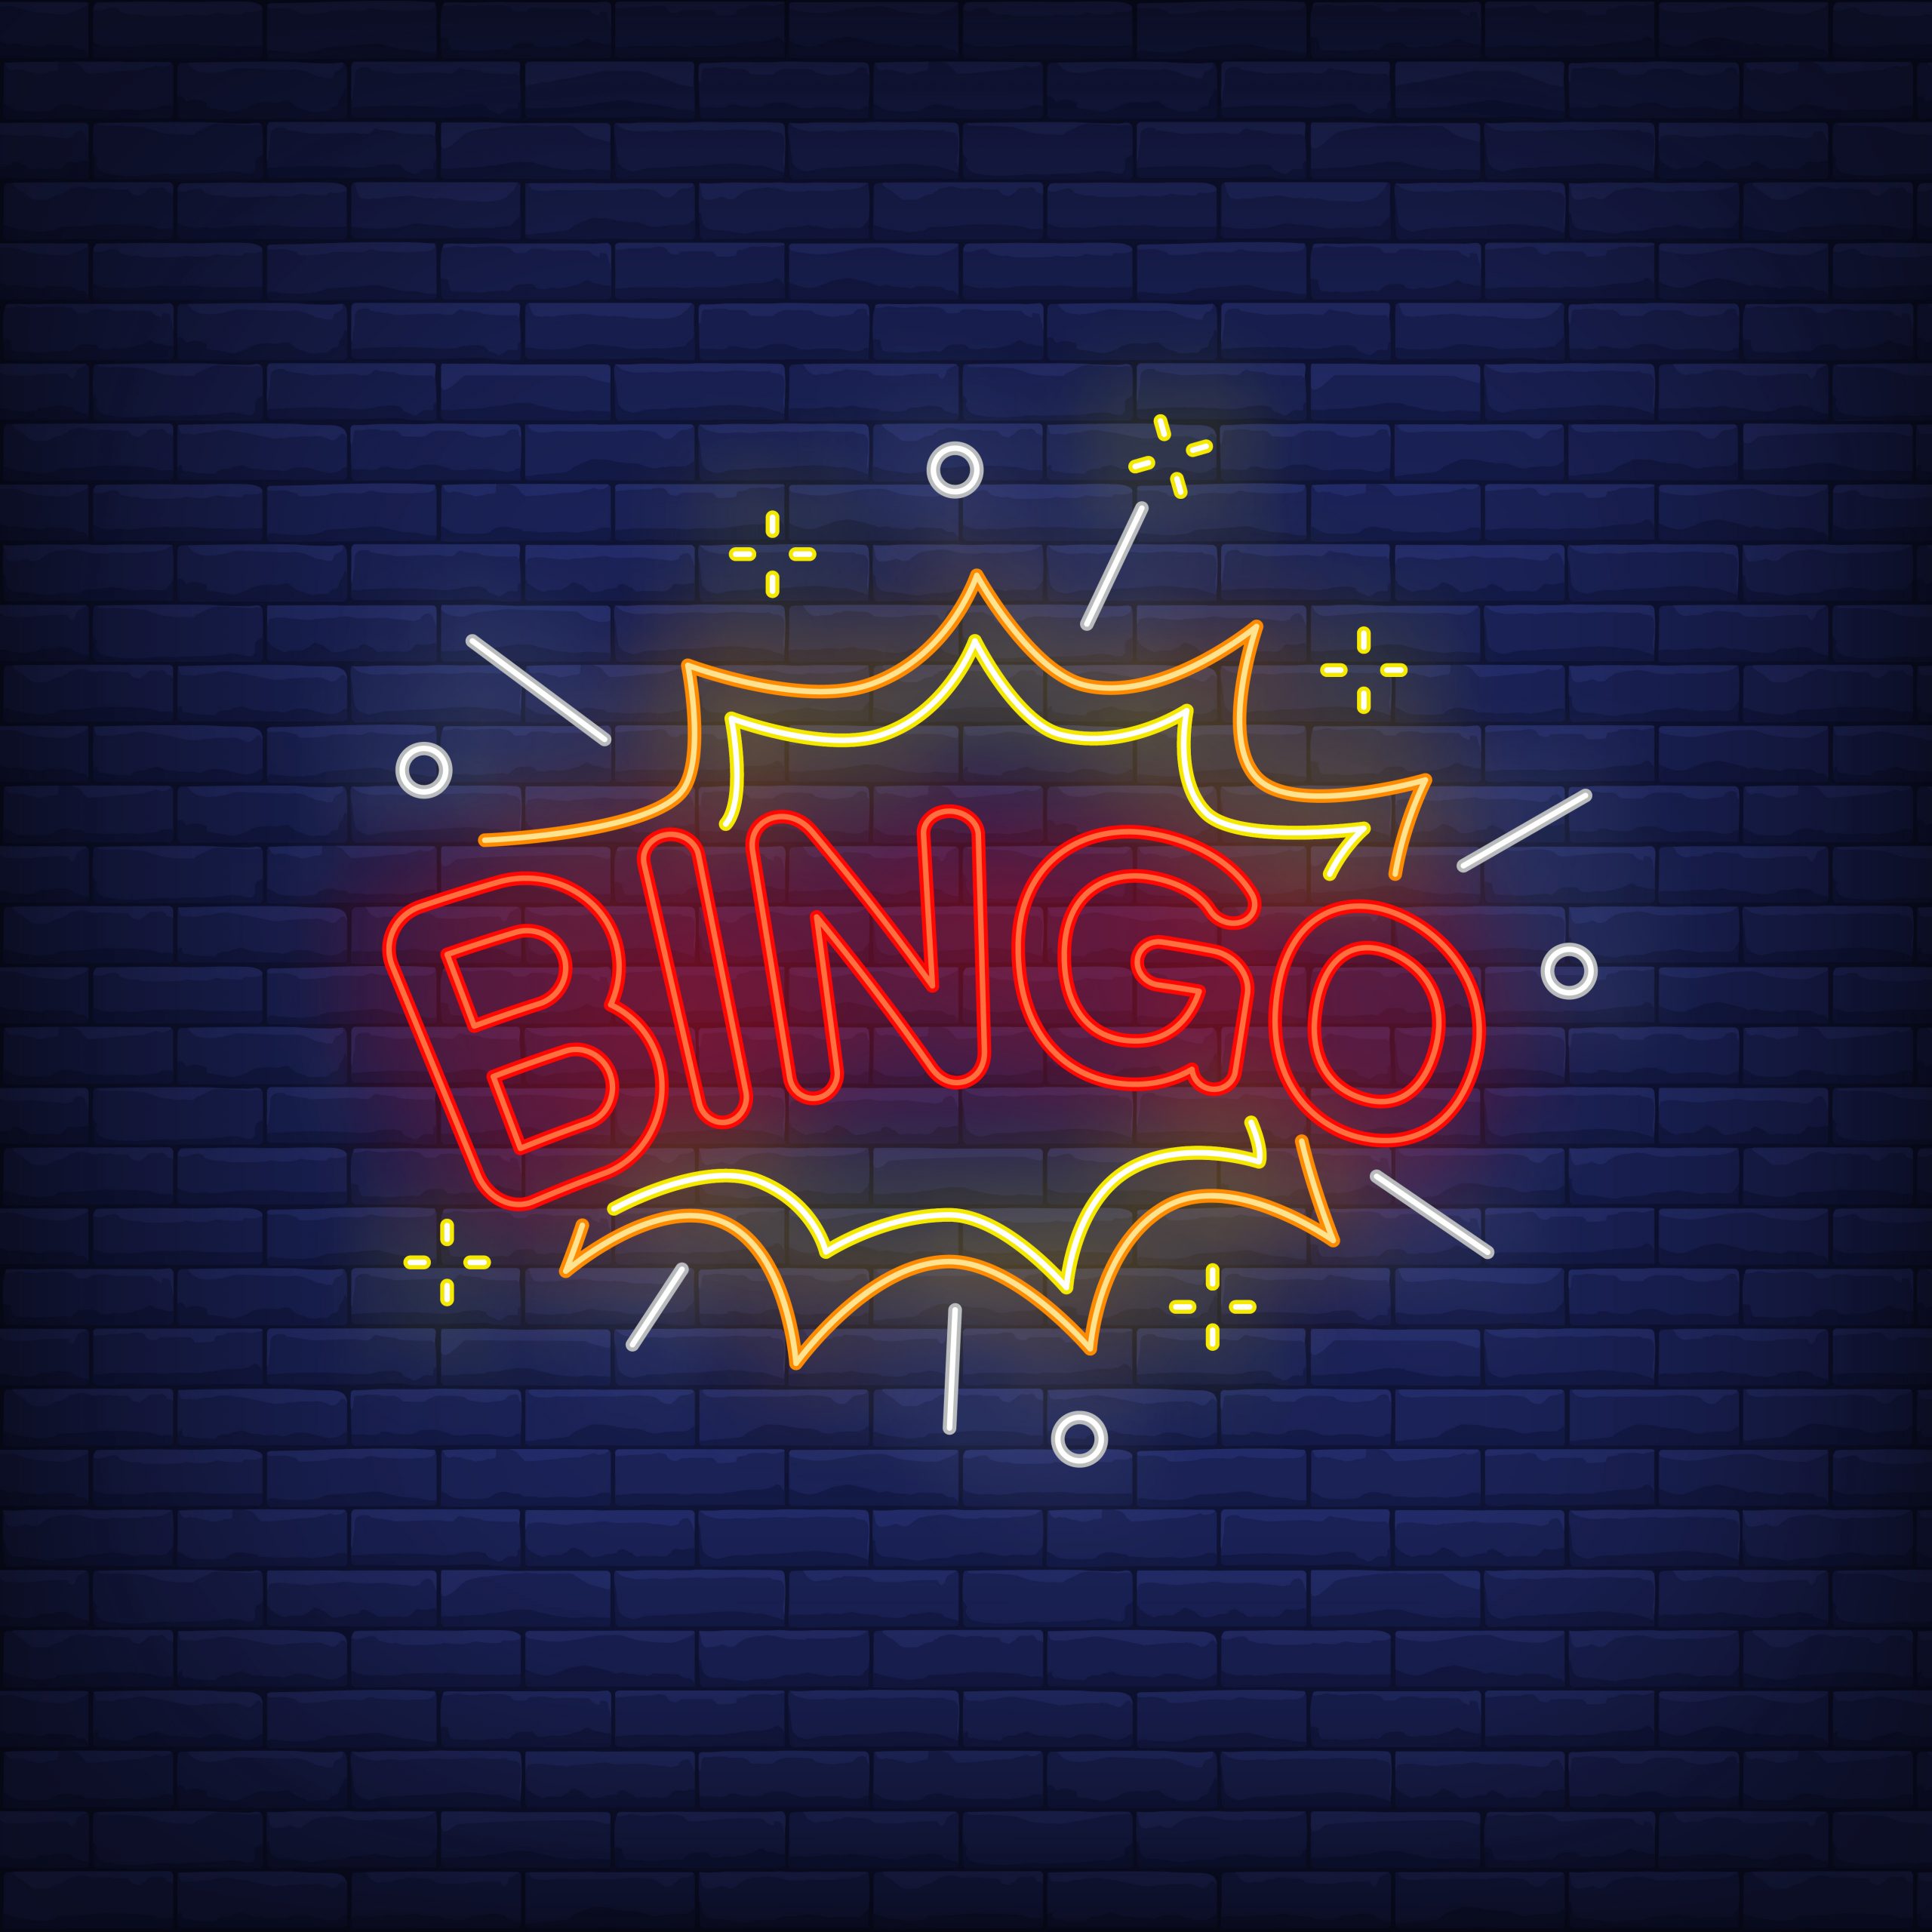 "BINGO" in the style of a neon sign over a dark blue brick wall